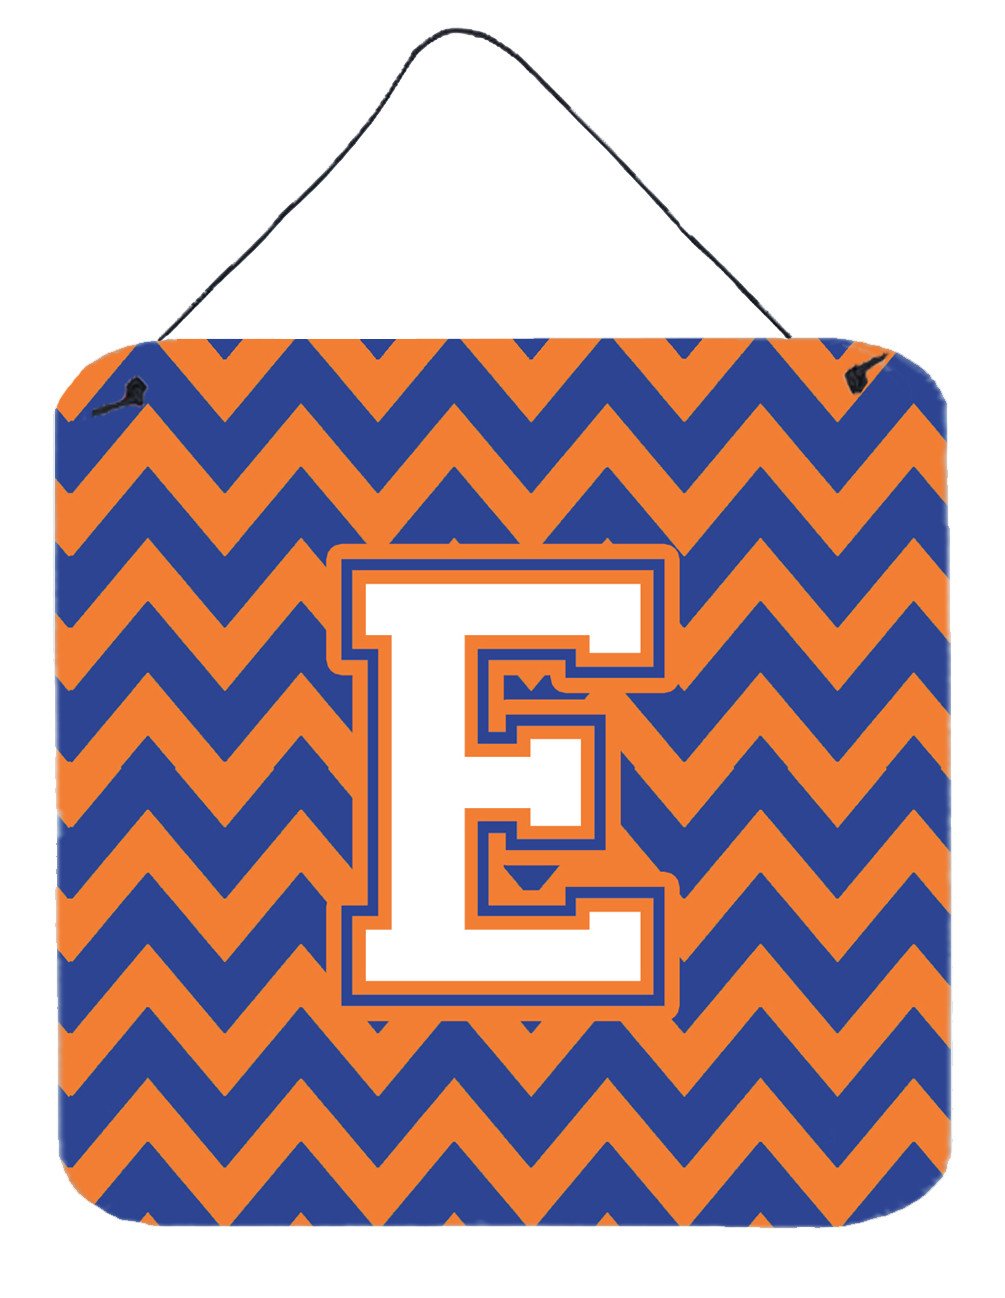 Letter E Chevron Blue and Orange #3 Wall or Door Hanging Prints CJ1060-EDS66 by Caroline's Treasures